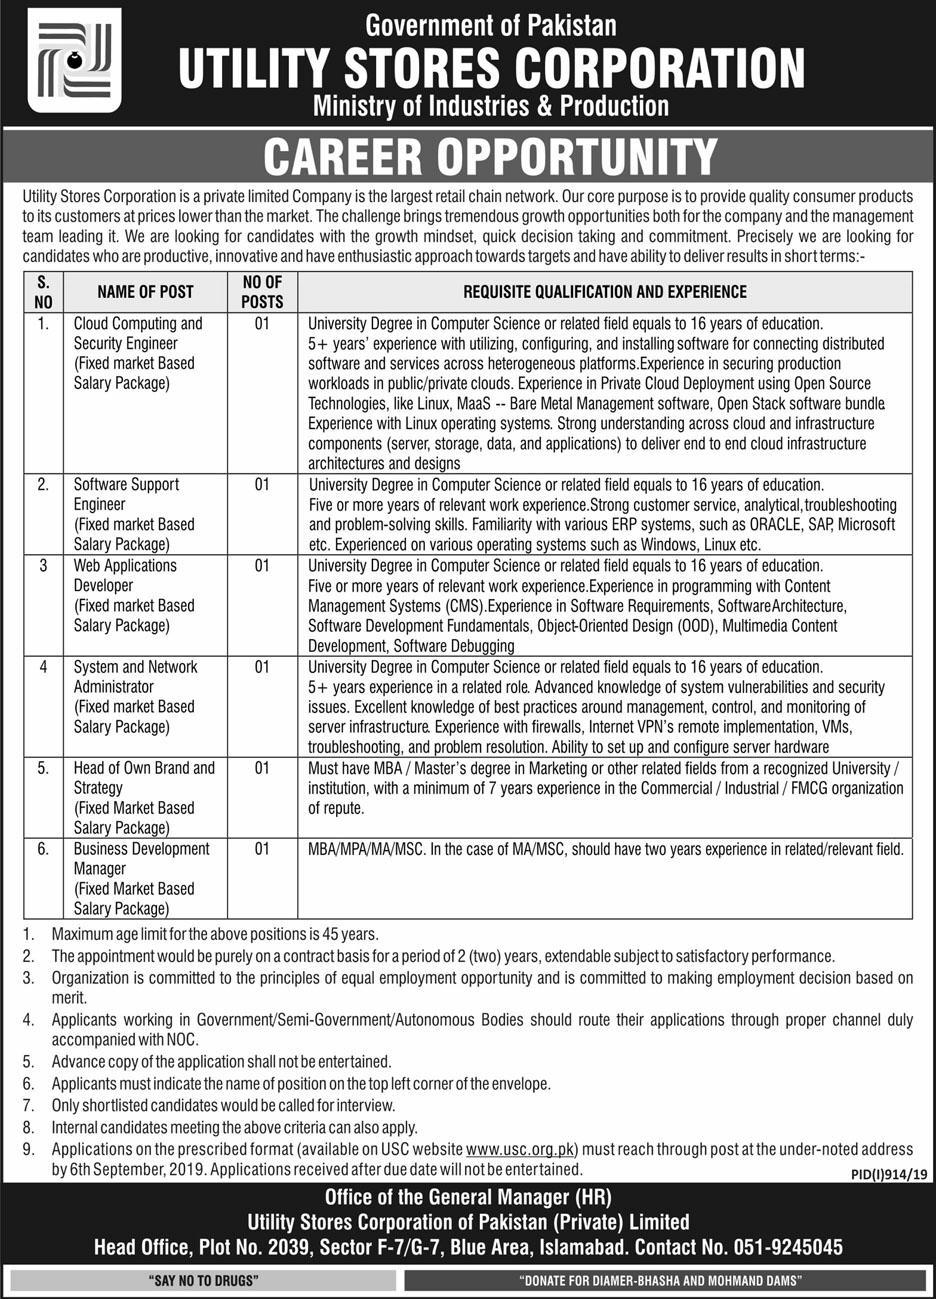 Utility Stores Corporation jobs 2019